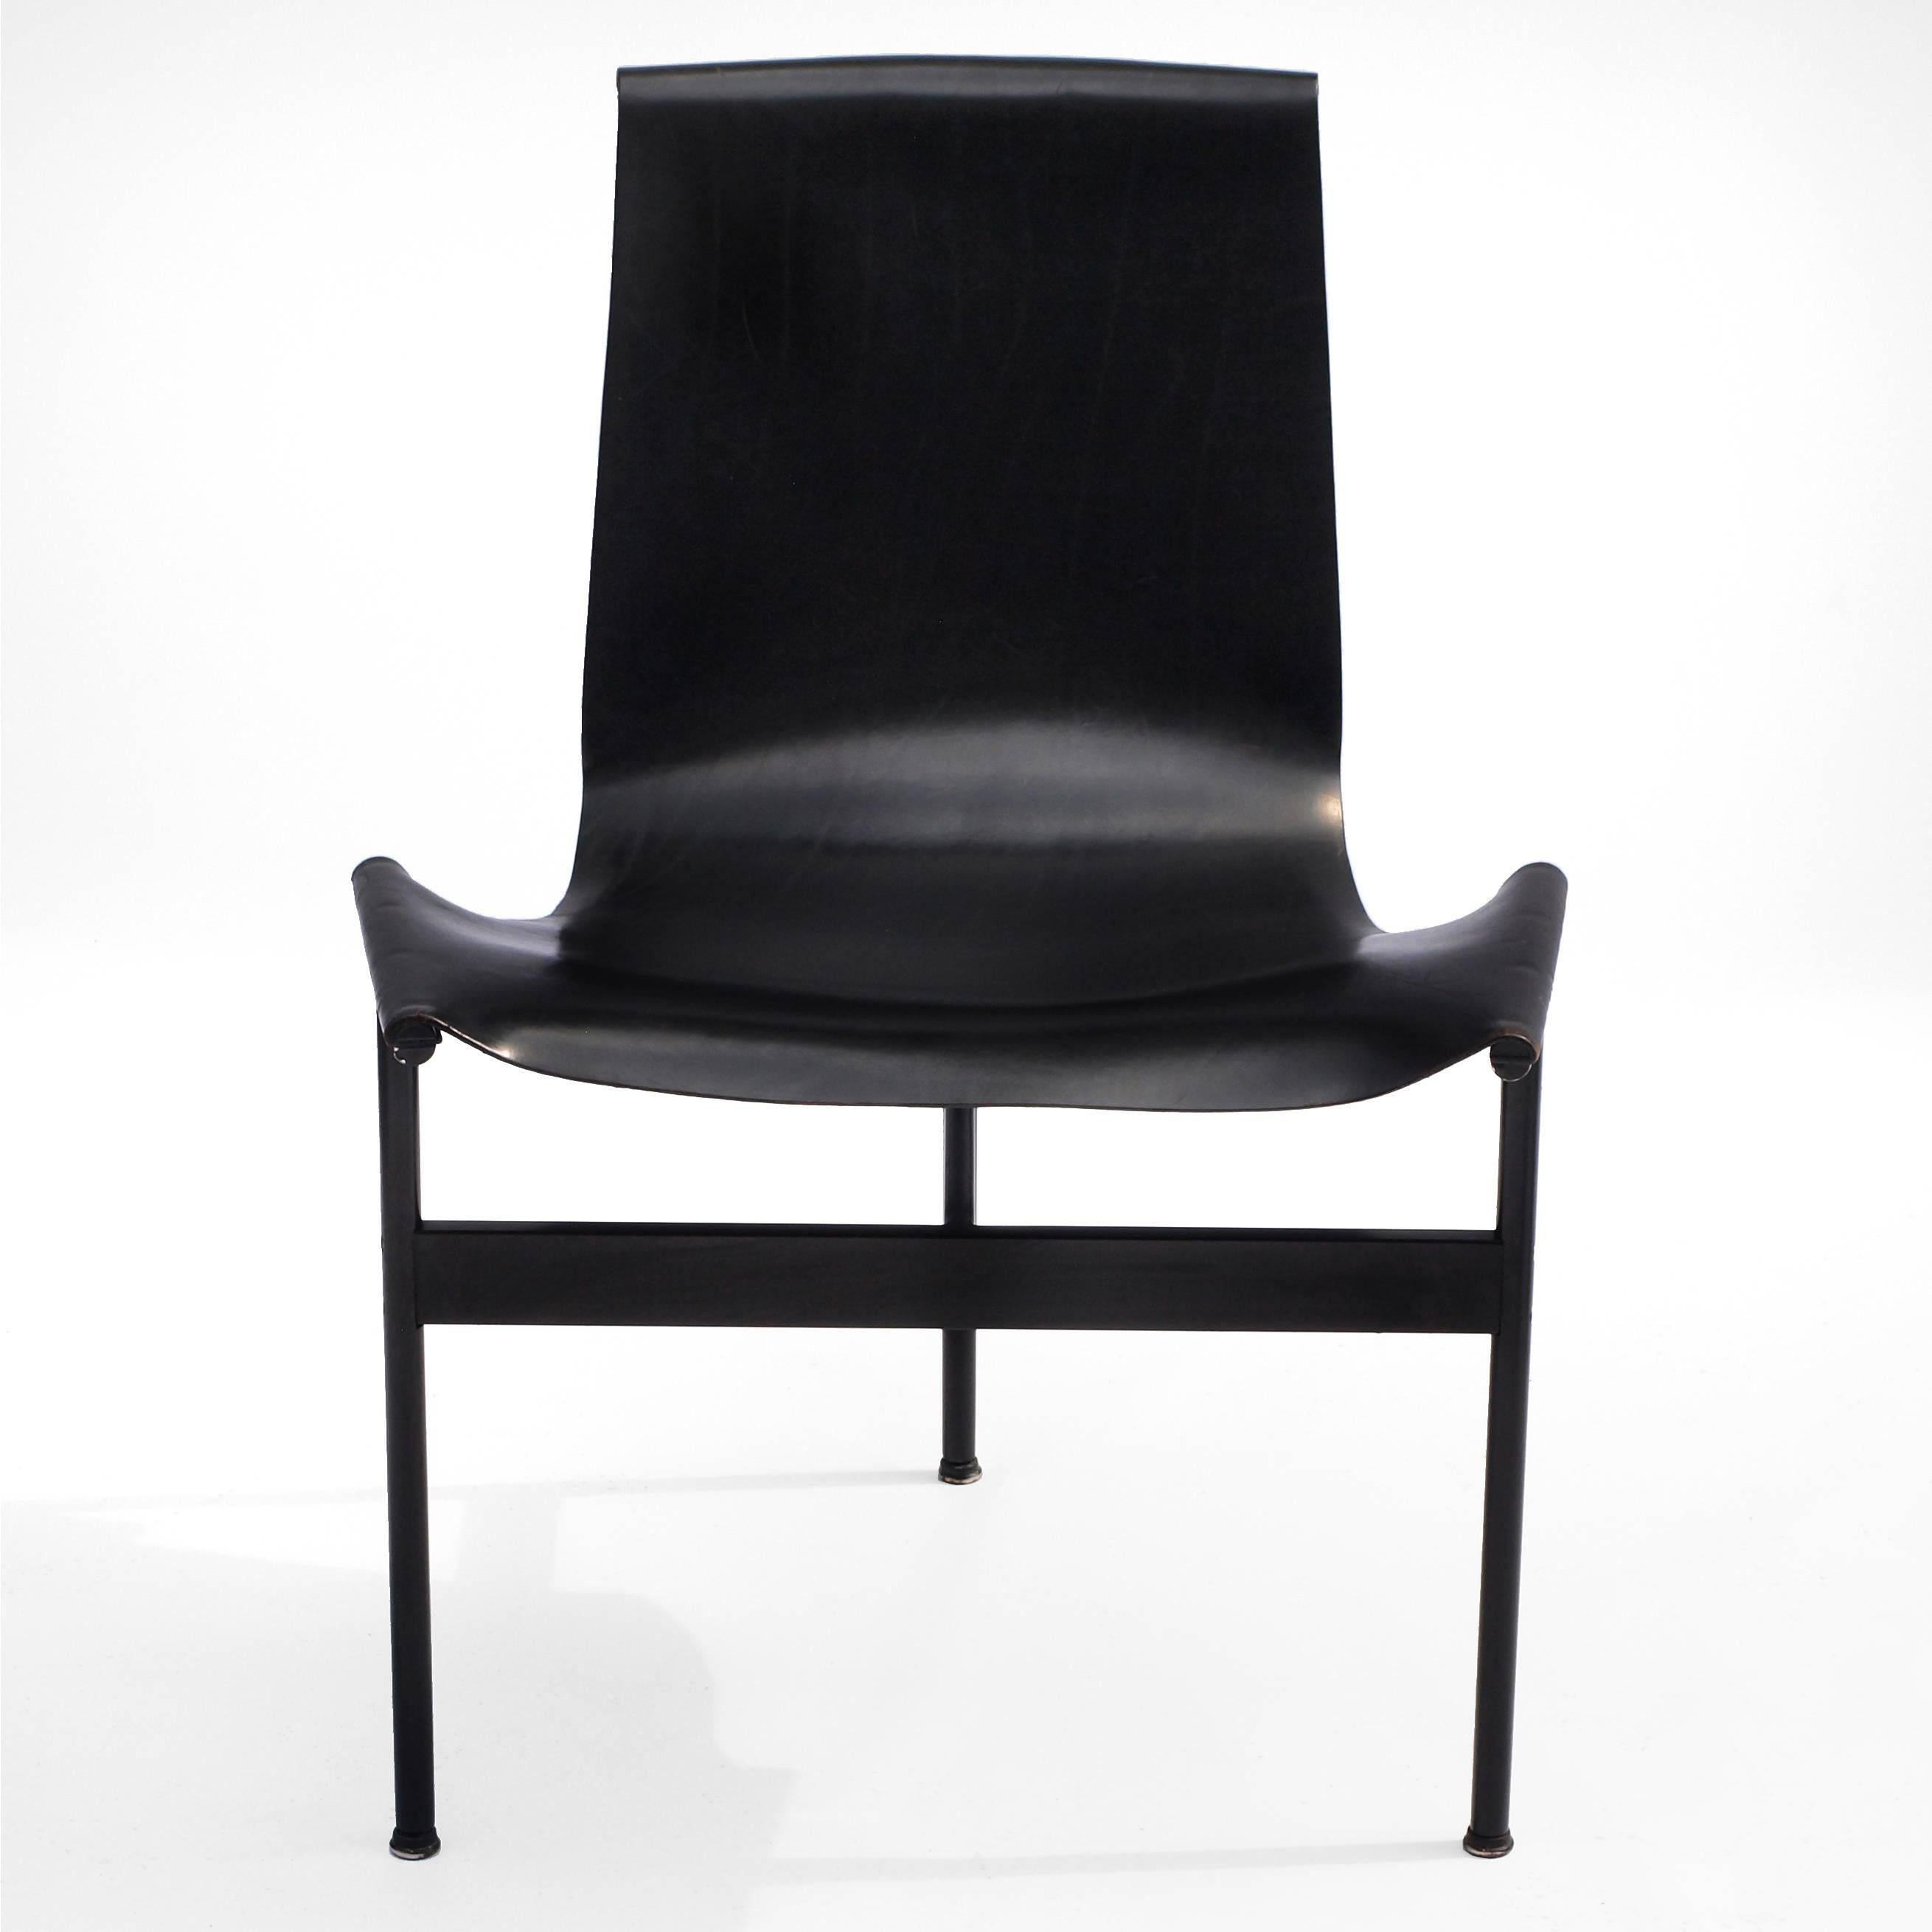 American Set of Six Black T-Chairs by William Katavolos for Laverne International